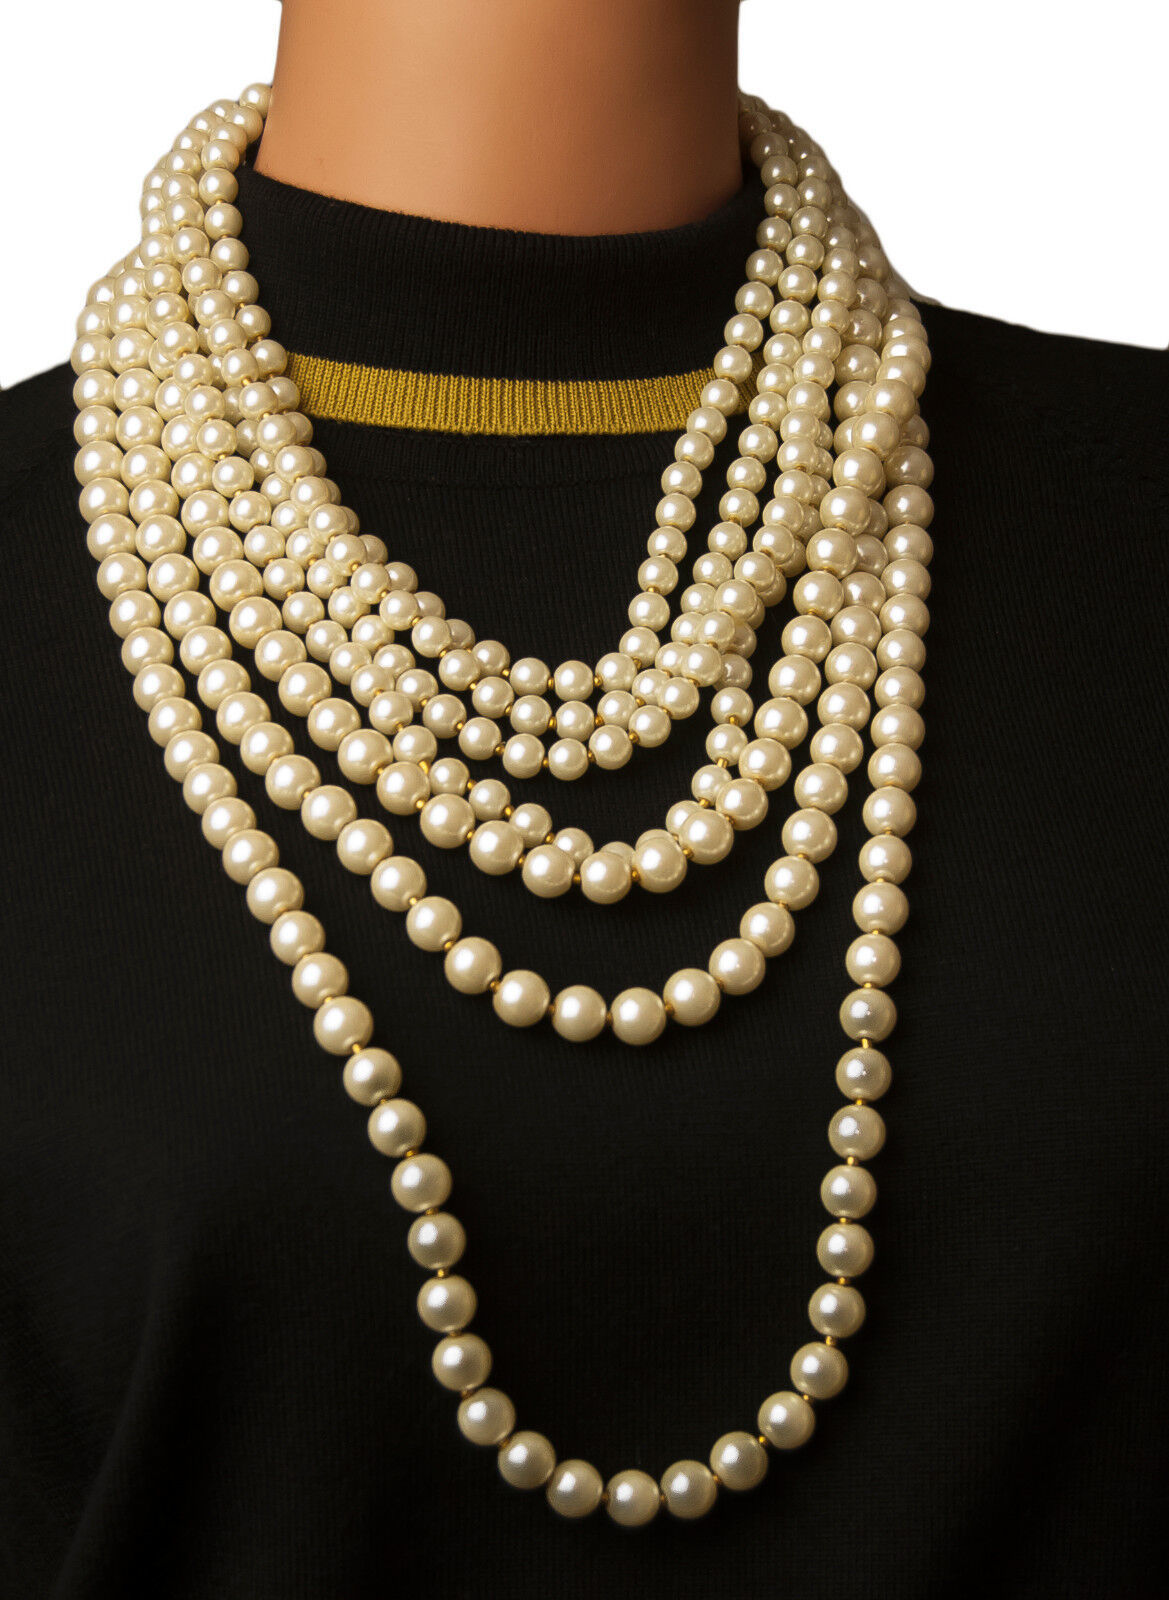 New Trendz 7 strand 16" graduated faux pearl necklace - $19.95